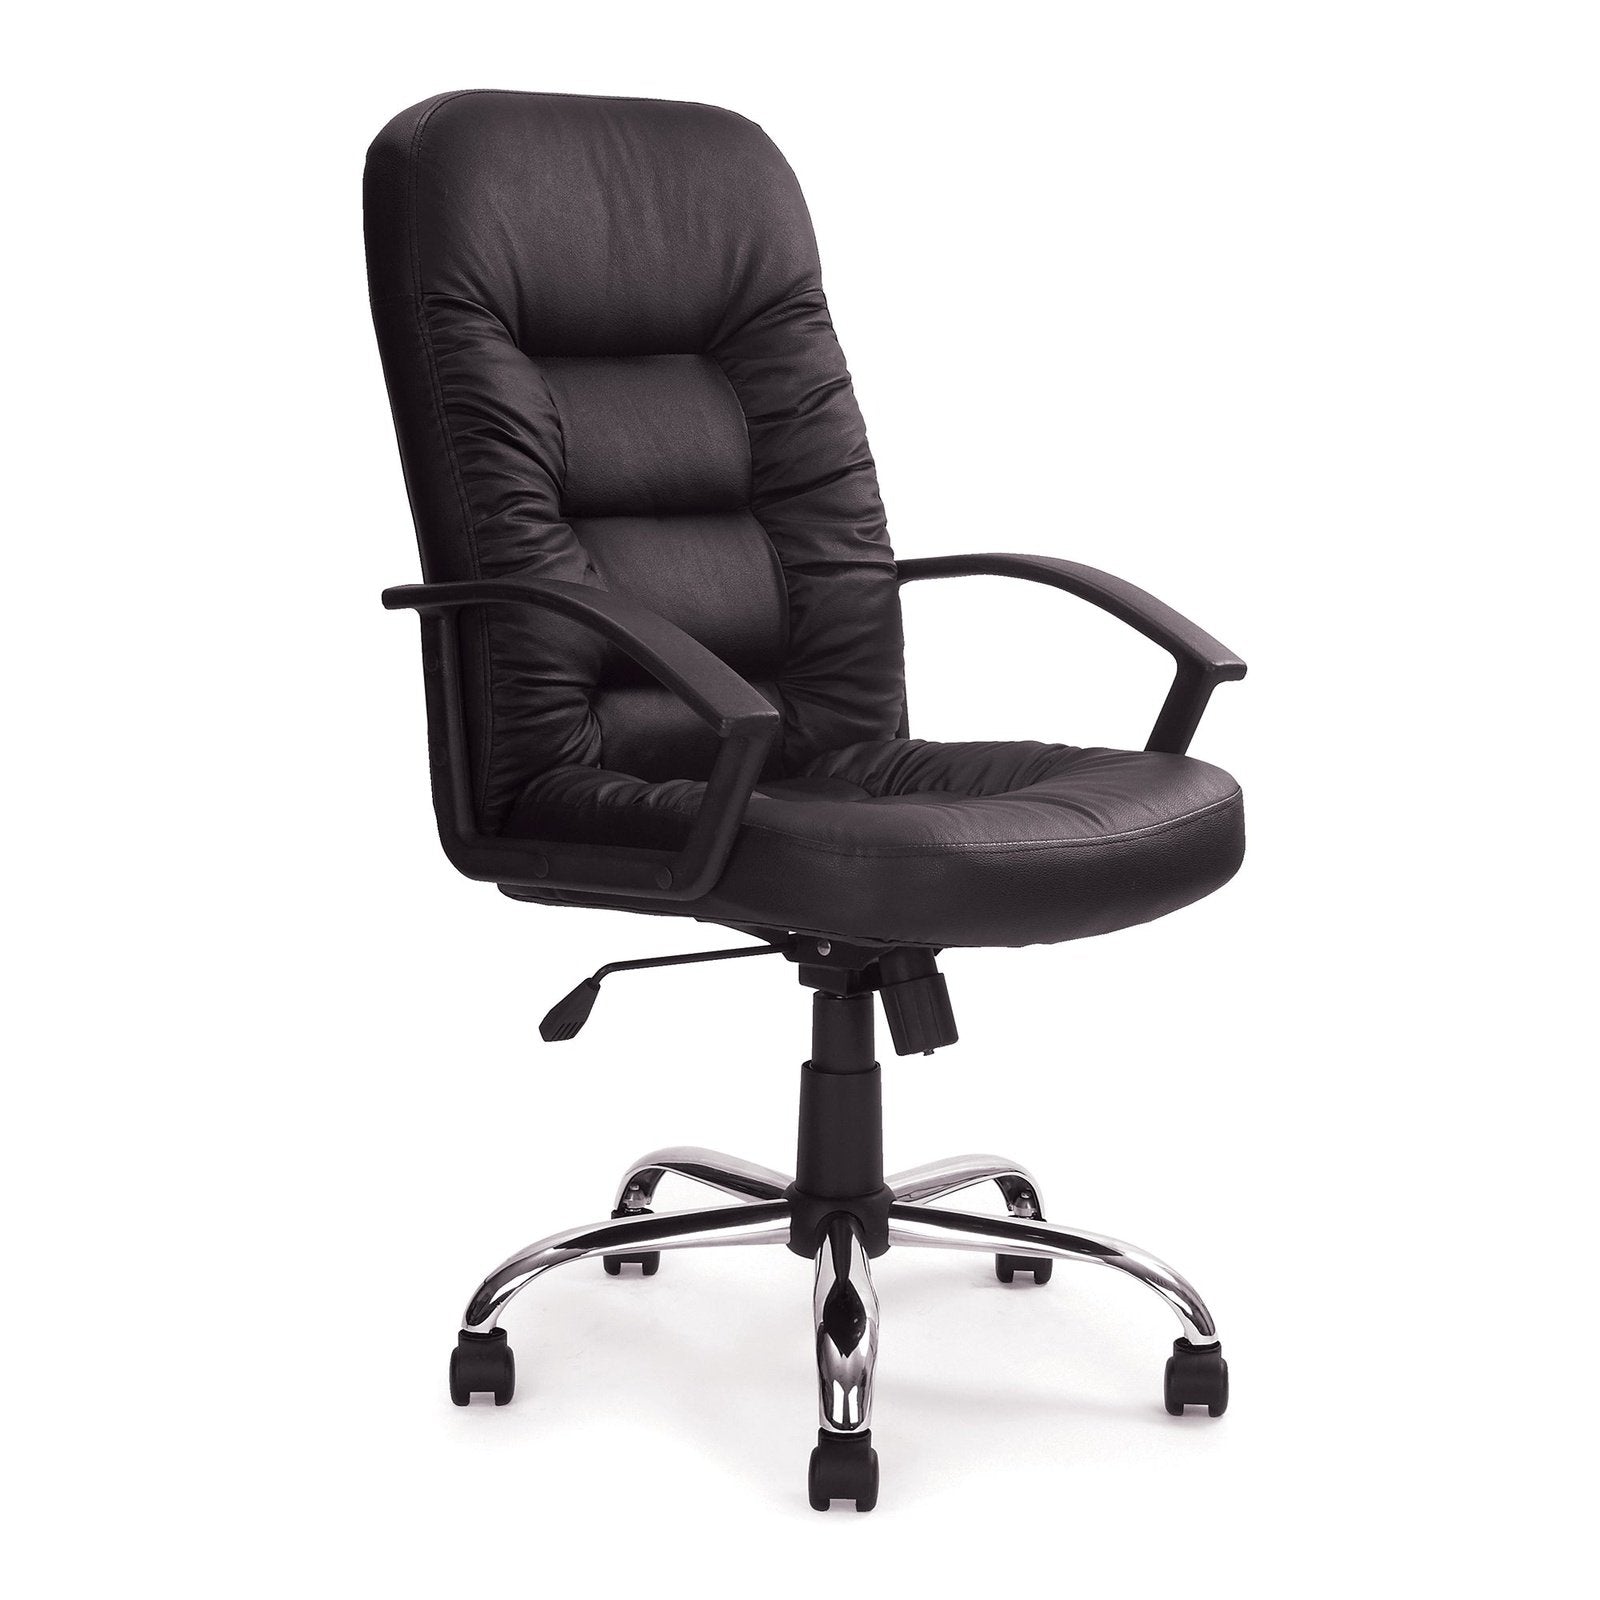 High Back Leather Faced Executive Armchair with Ruched Panel Detailing and Chrome Swivel Base - Black - Office Products Online